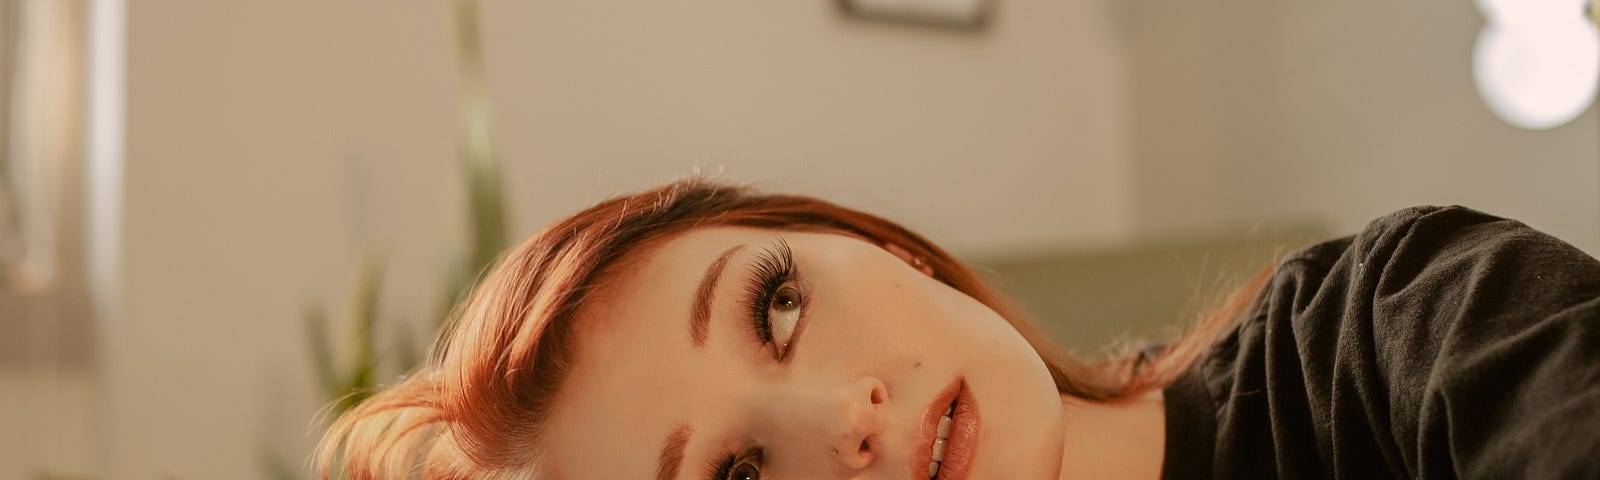 A red headed woman laying her head down on her arm on a glass table top reflecting upon something, as her image reflects back on herself.